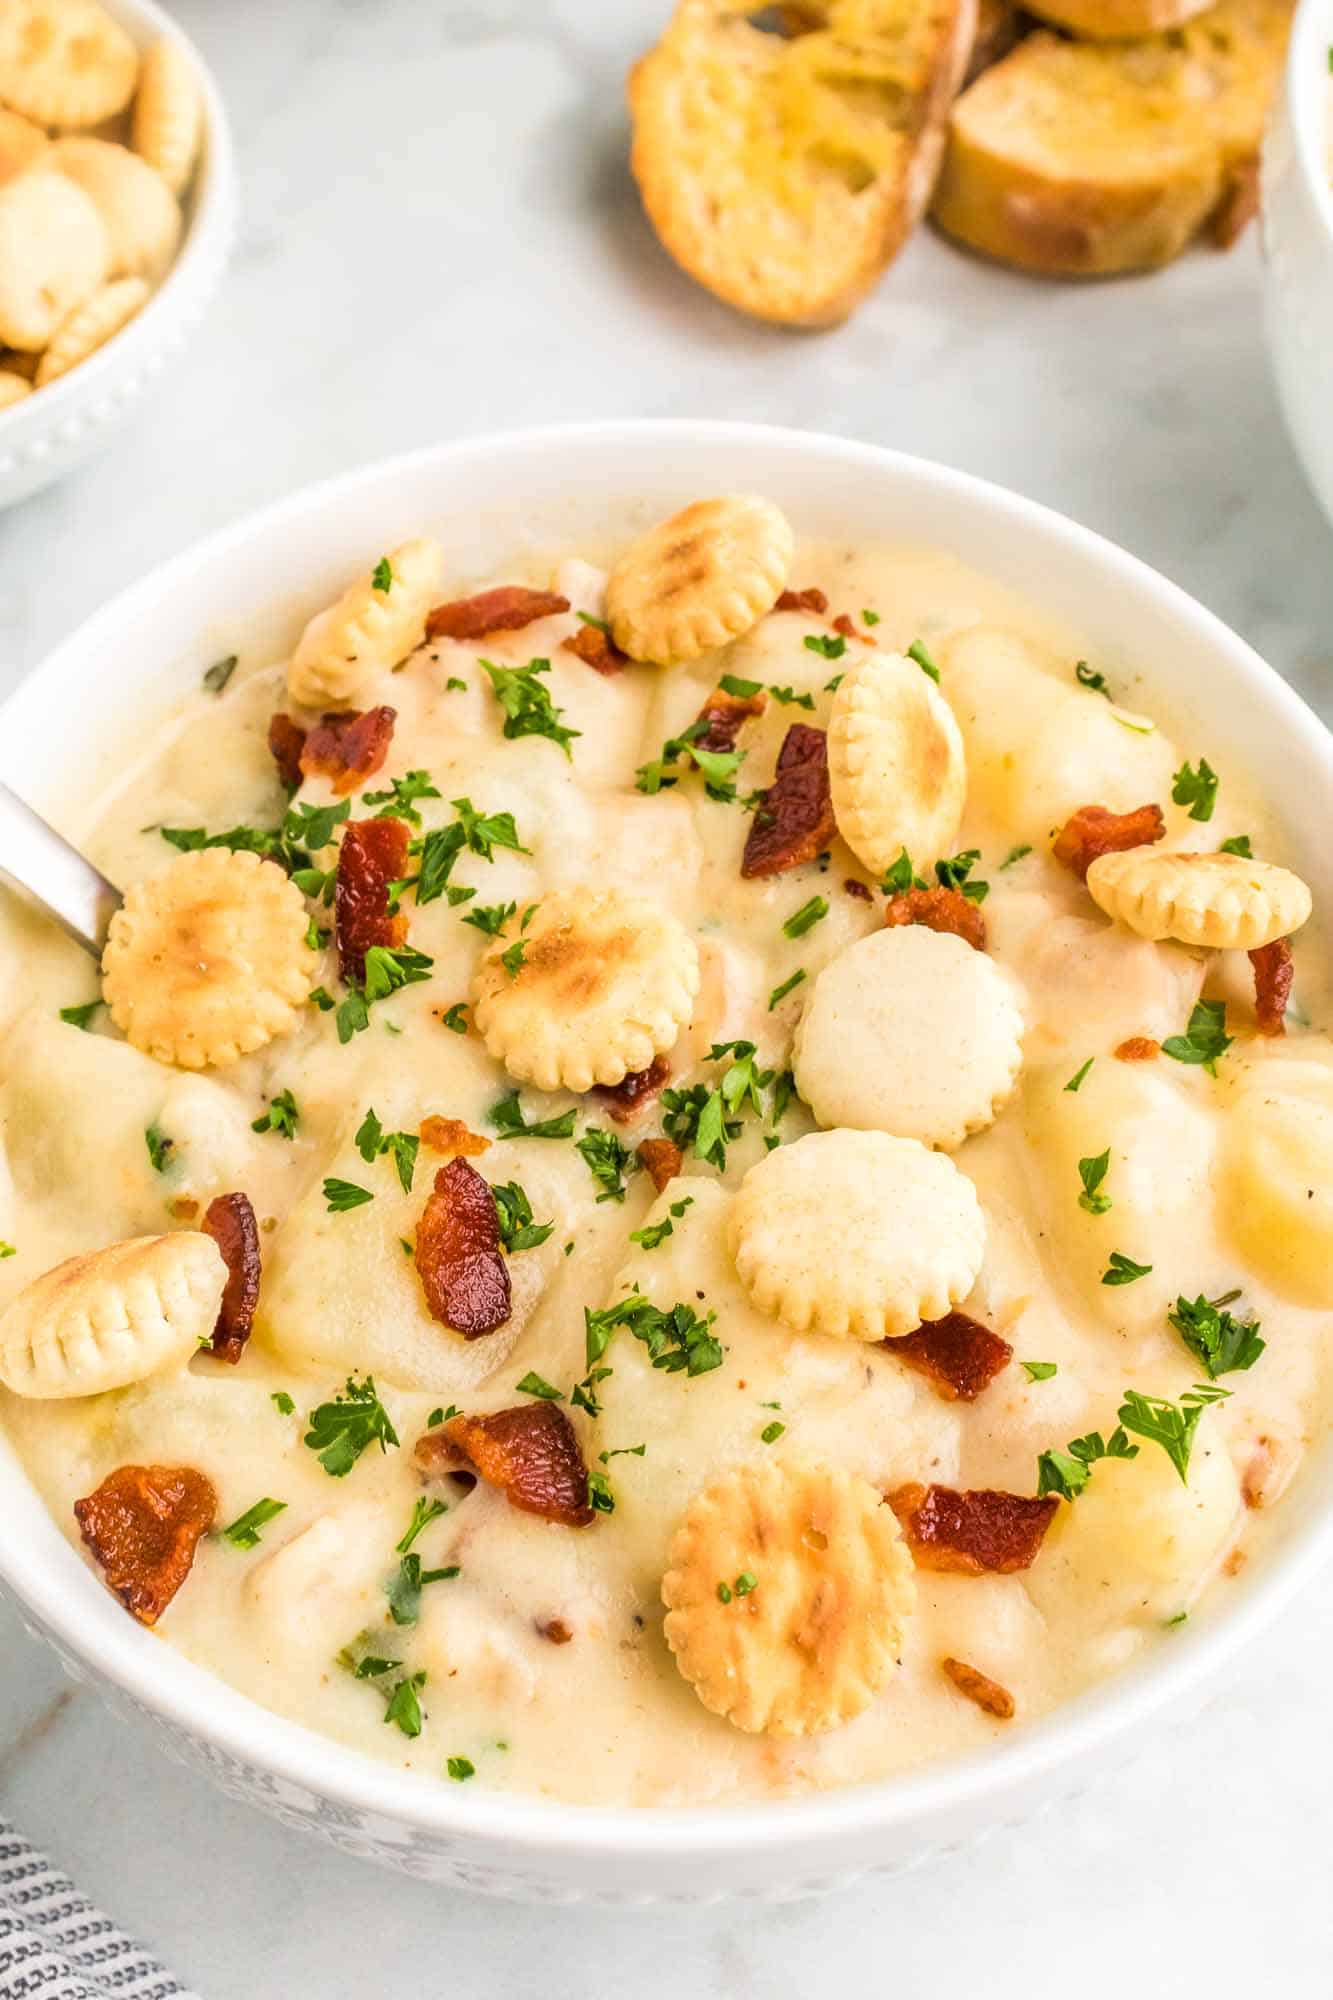 Creamy clam chowder served in a white bowl, topped with extra crispy bacon and oyster crackers.